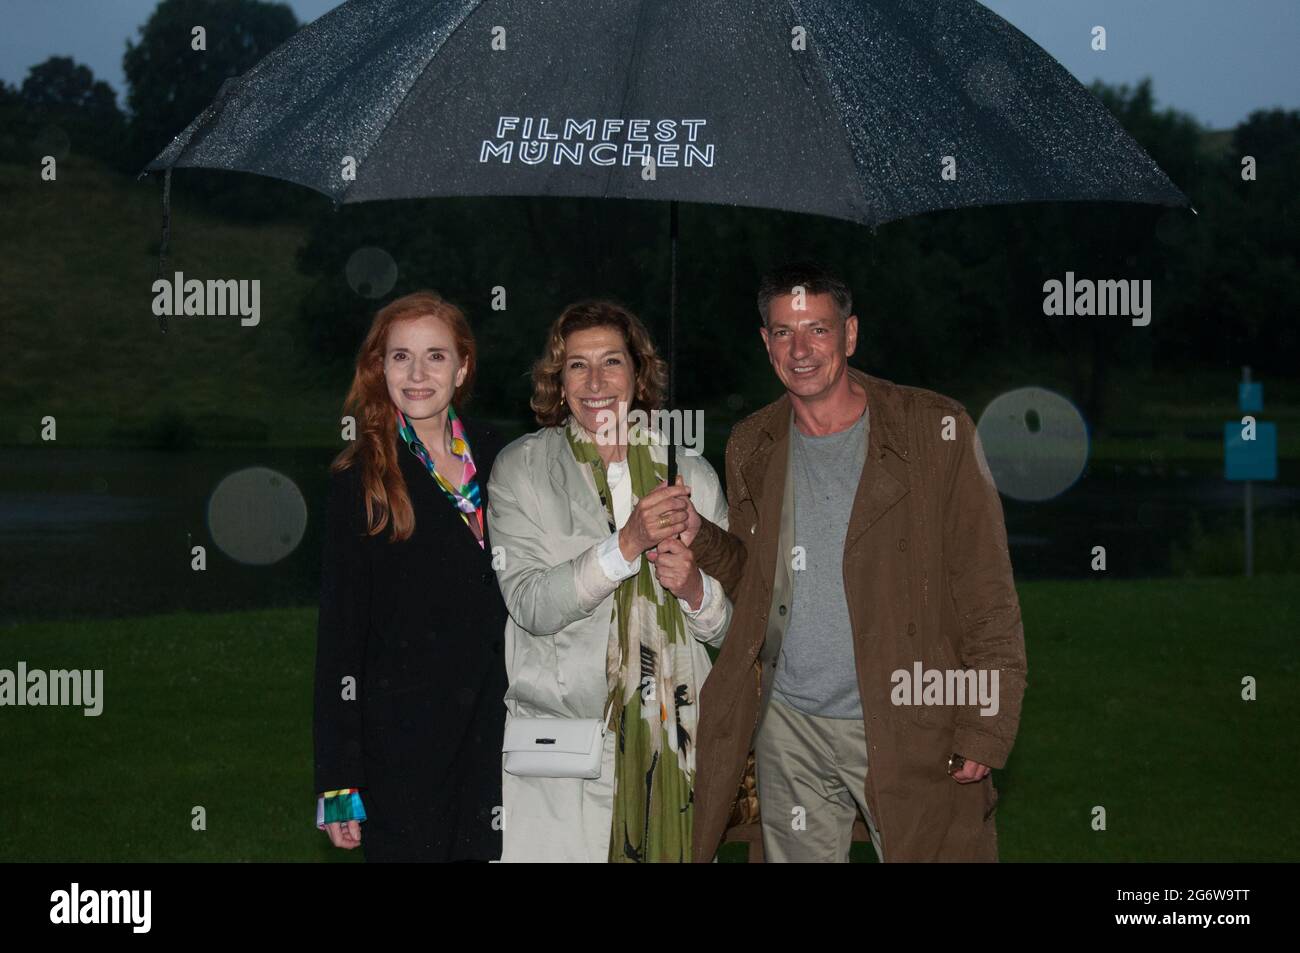 Adele Neubauer, Sibylle Canonica and Dirk Kummer seen before the premiere screening of their film 'Faltenfrei' at Filmfest München 2021 Stock Photo